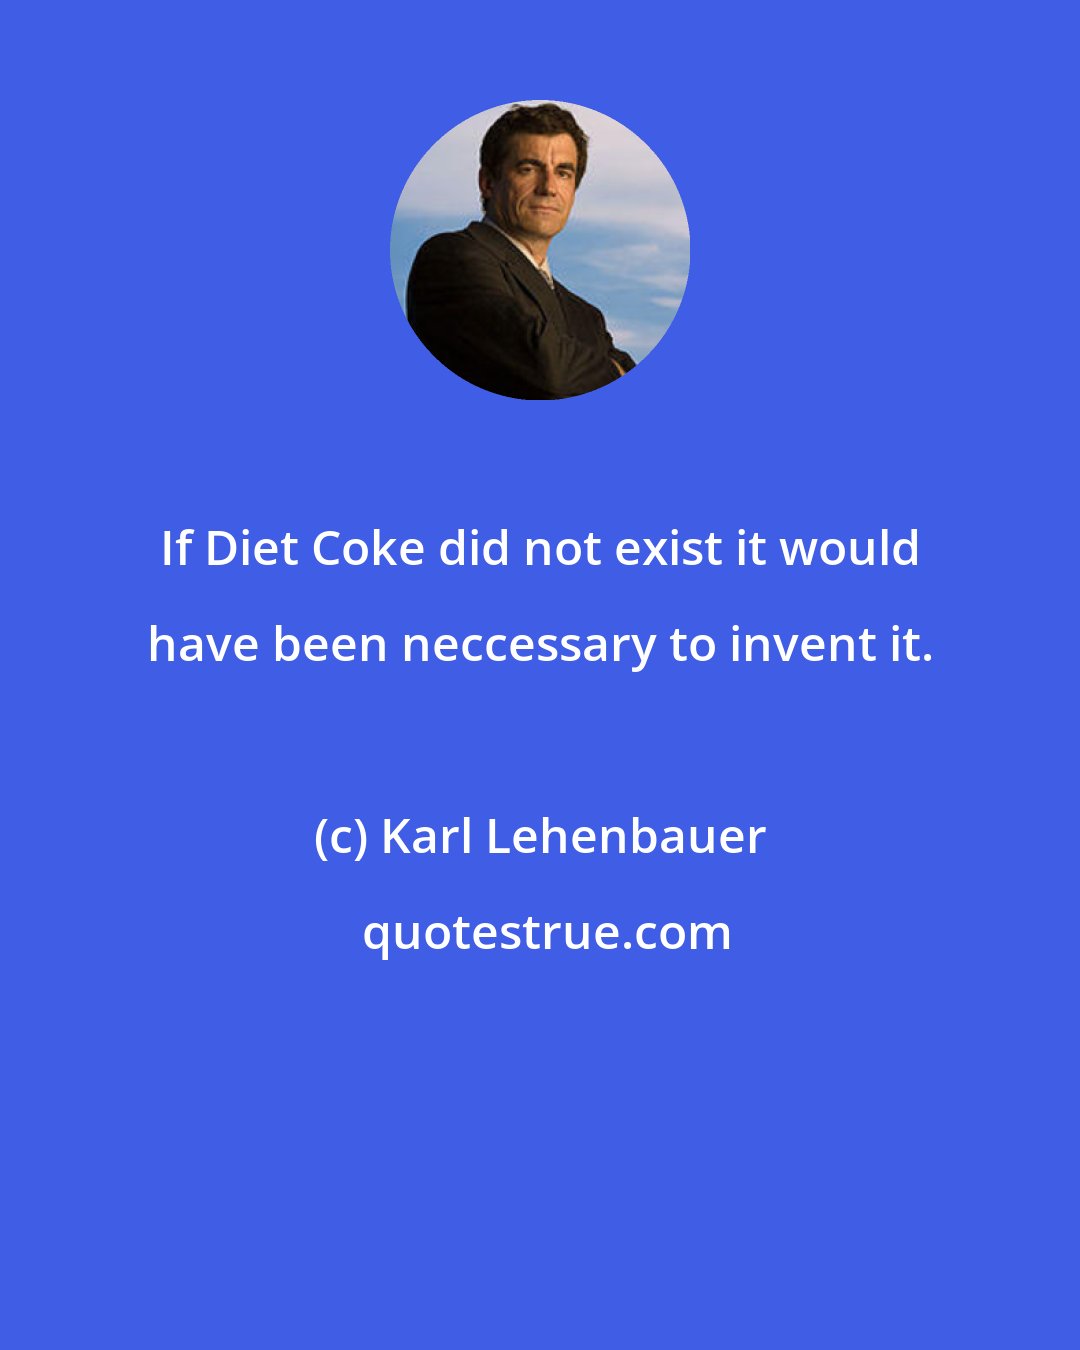 Karl Lehenbauer: If Diet Coke did not exist it would have been neccessary to invent it.